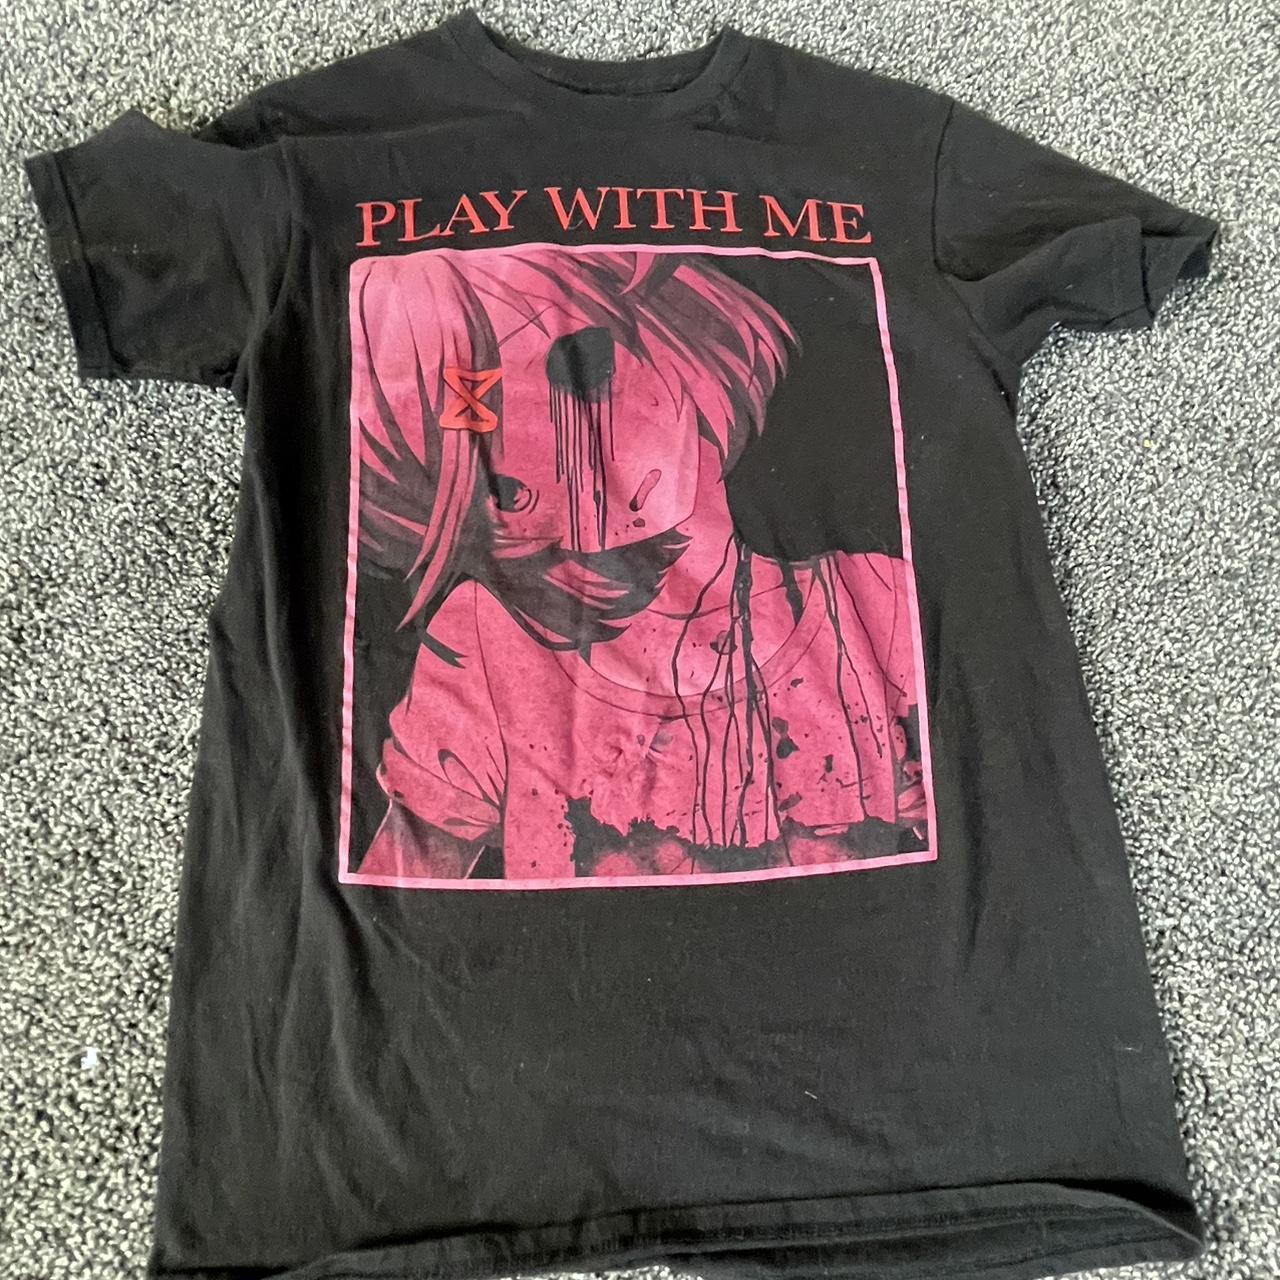 Play with me club